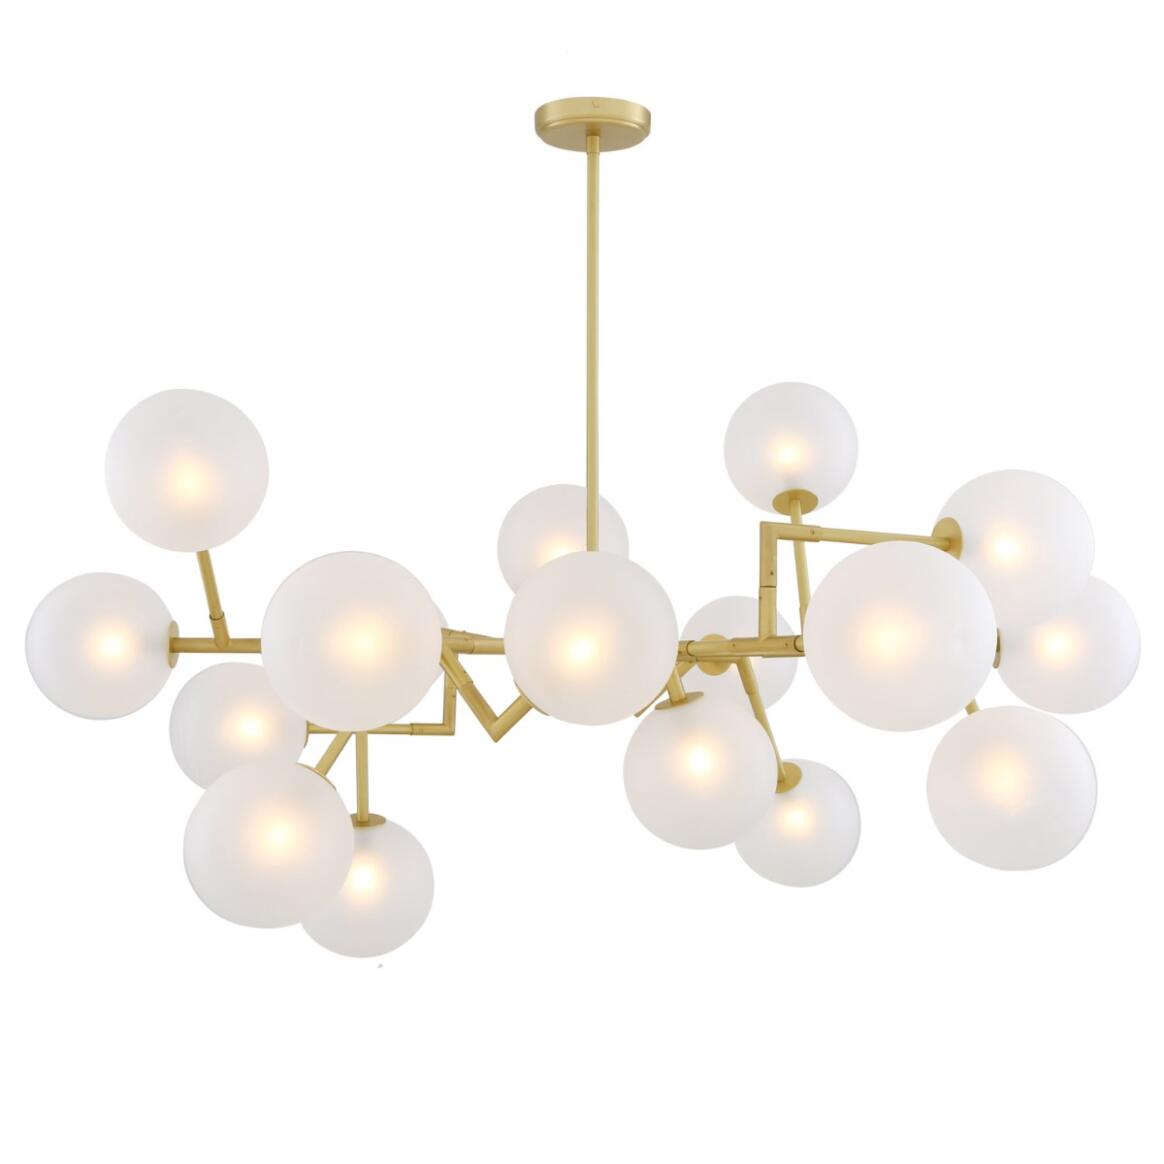 Athens Glass Globe Chandelier, 18 Light main product image